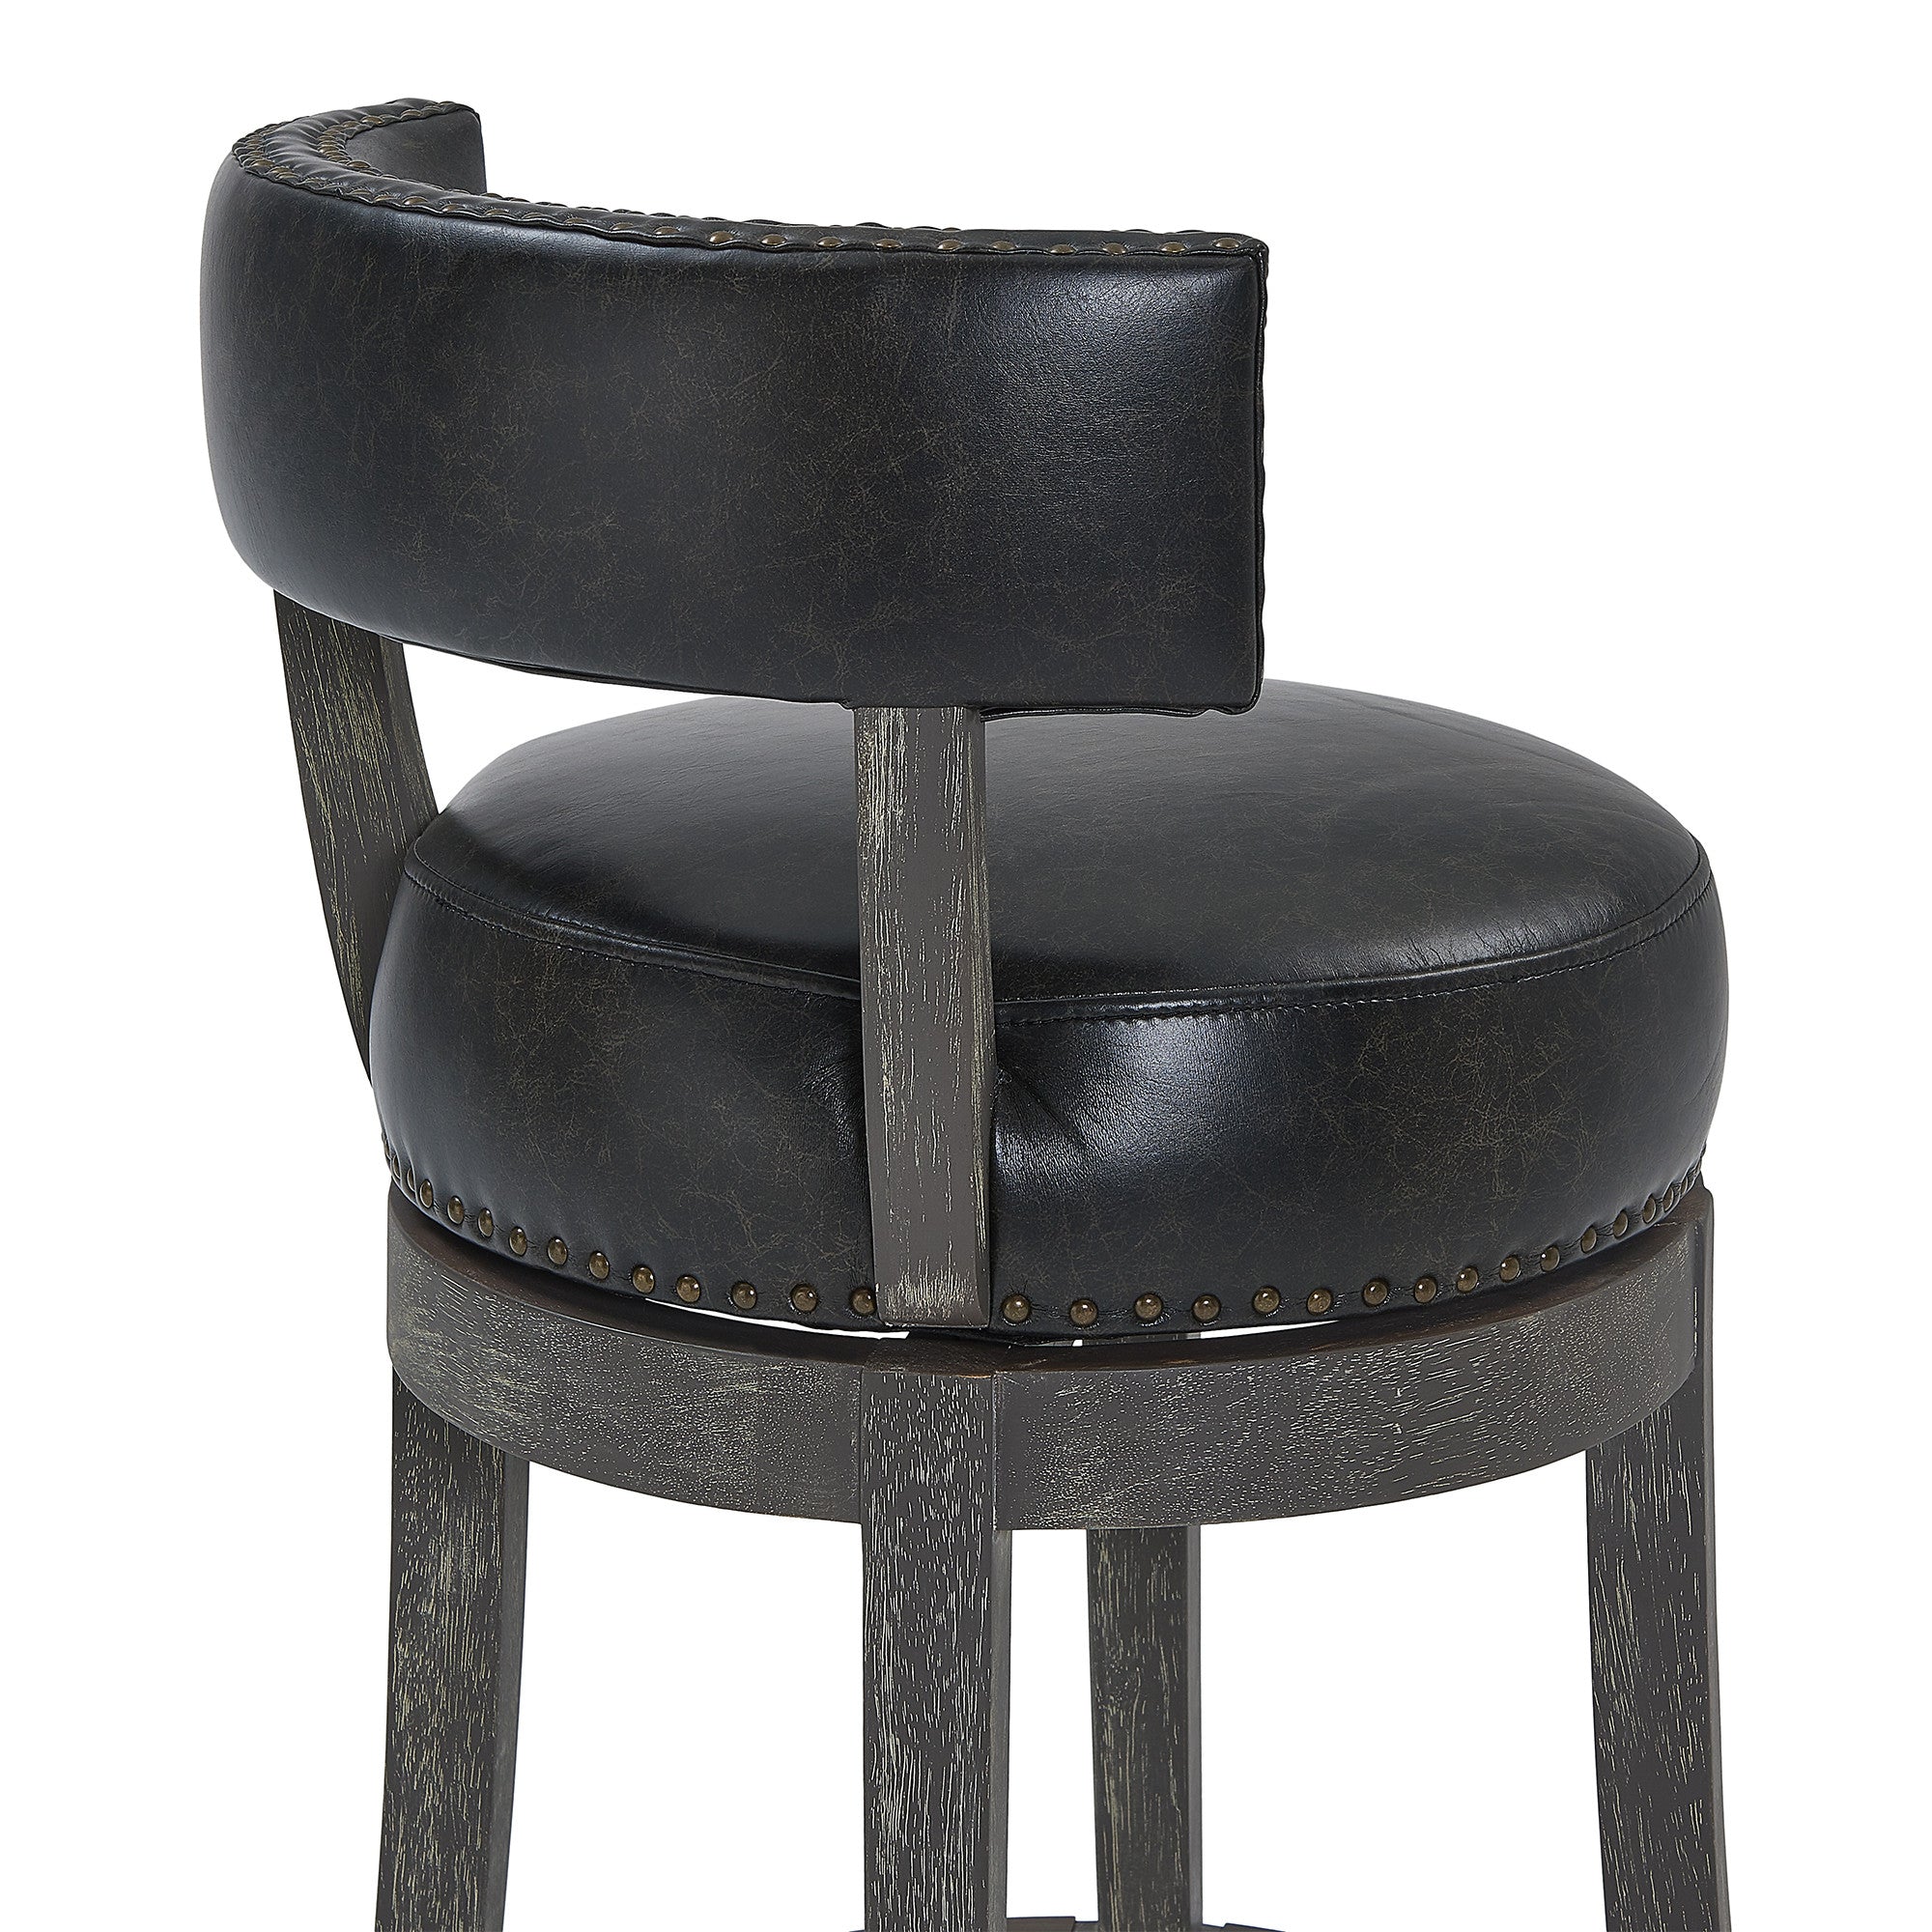 26" Black And Dark Gray Faux Leather And Wood Swivel Low Back Counter Height Bar Chair